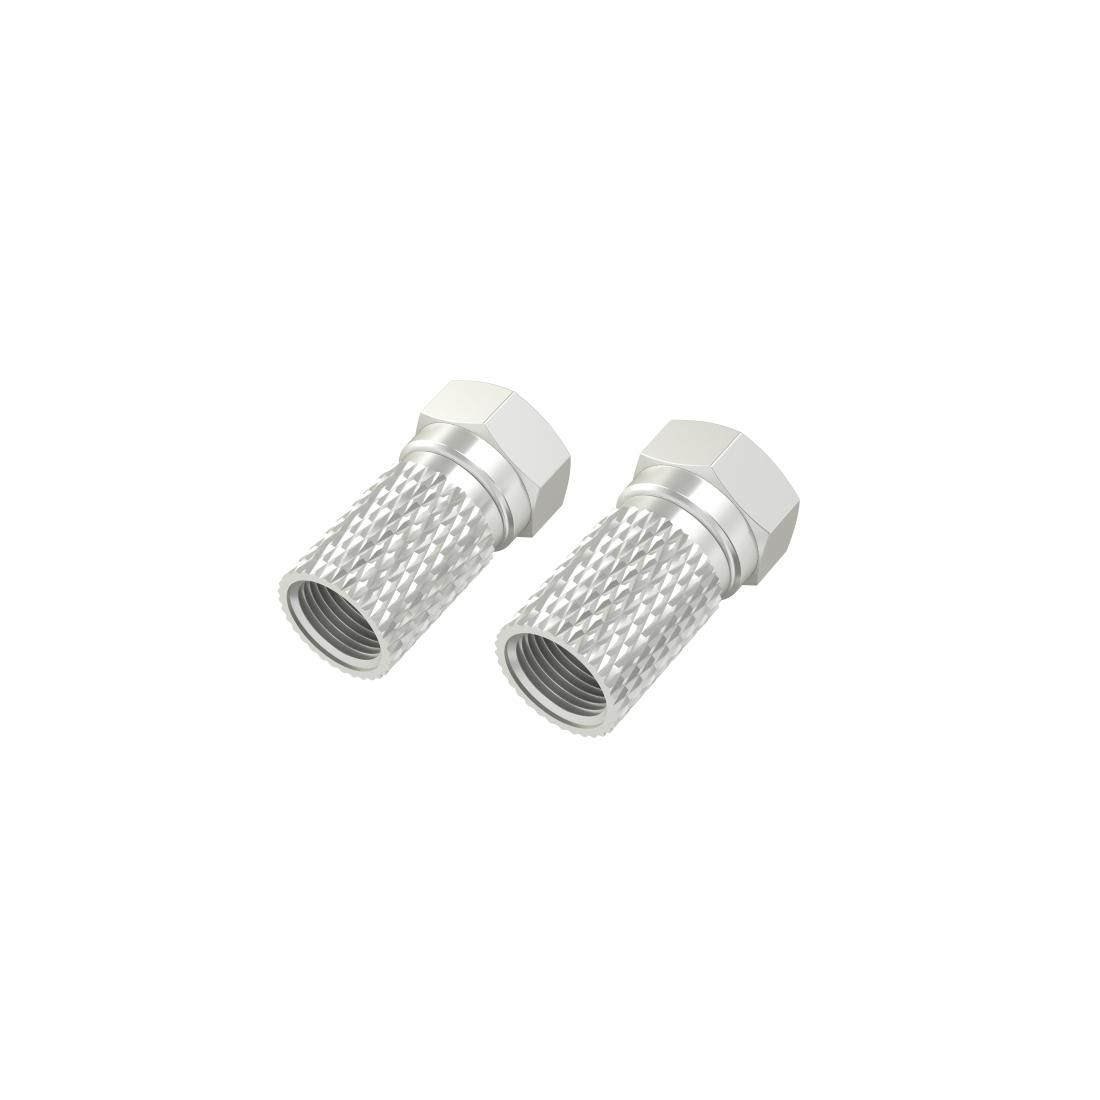 Hama 205207 W128824549 7 Coaxial Connector F-Type 2 